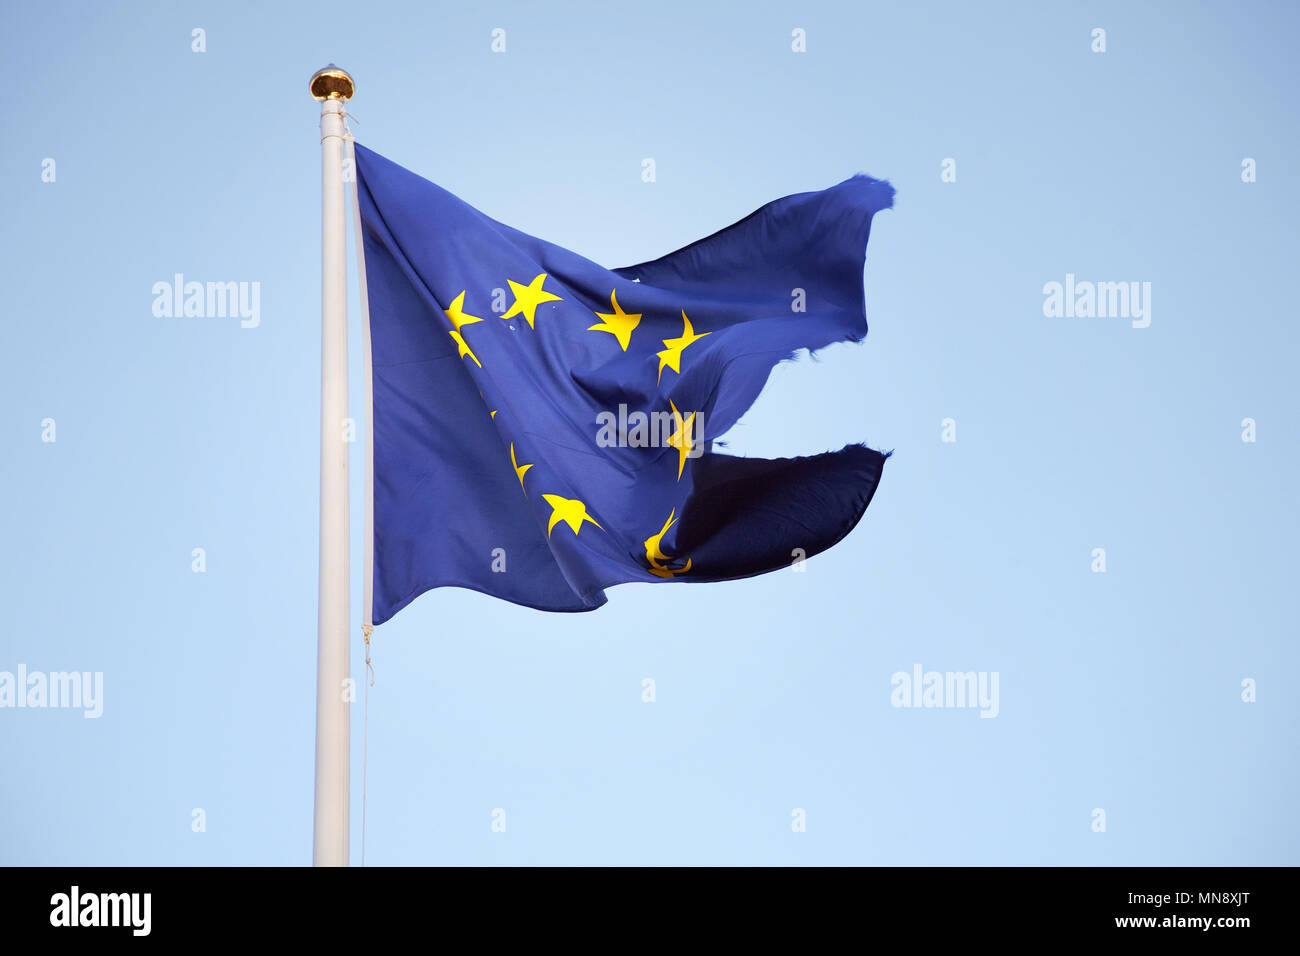 A torn flag of the European Union. The flag can symbolize decay and crisis. Stock Photo